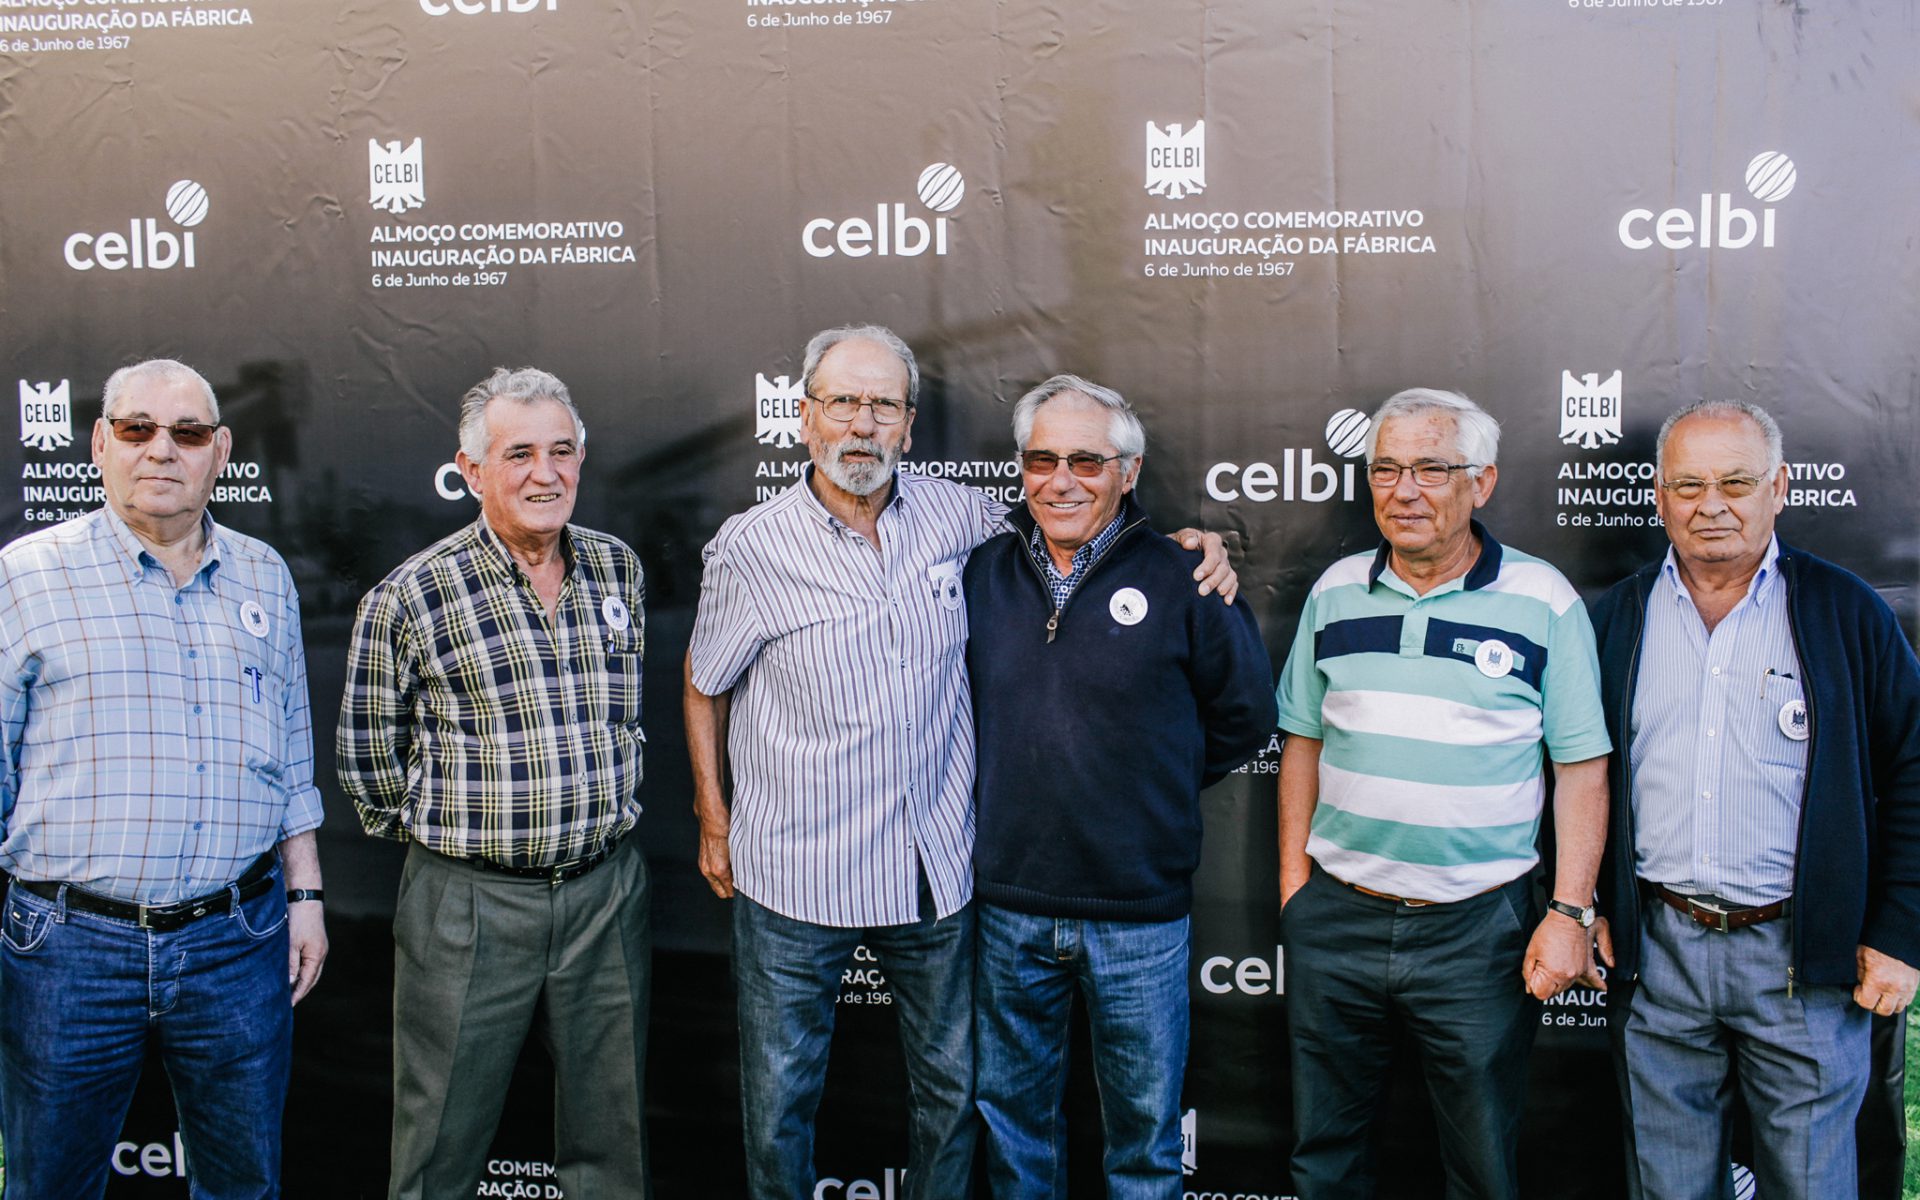 “Honouring Celbi’s history makes us bigger and better”